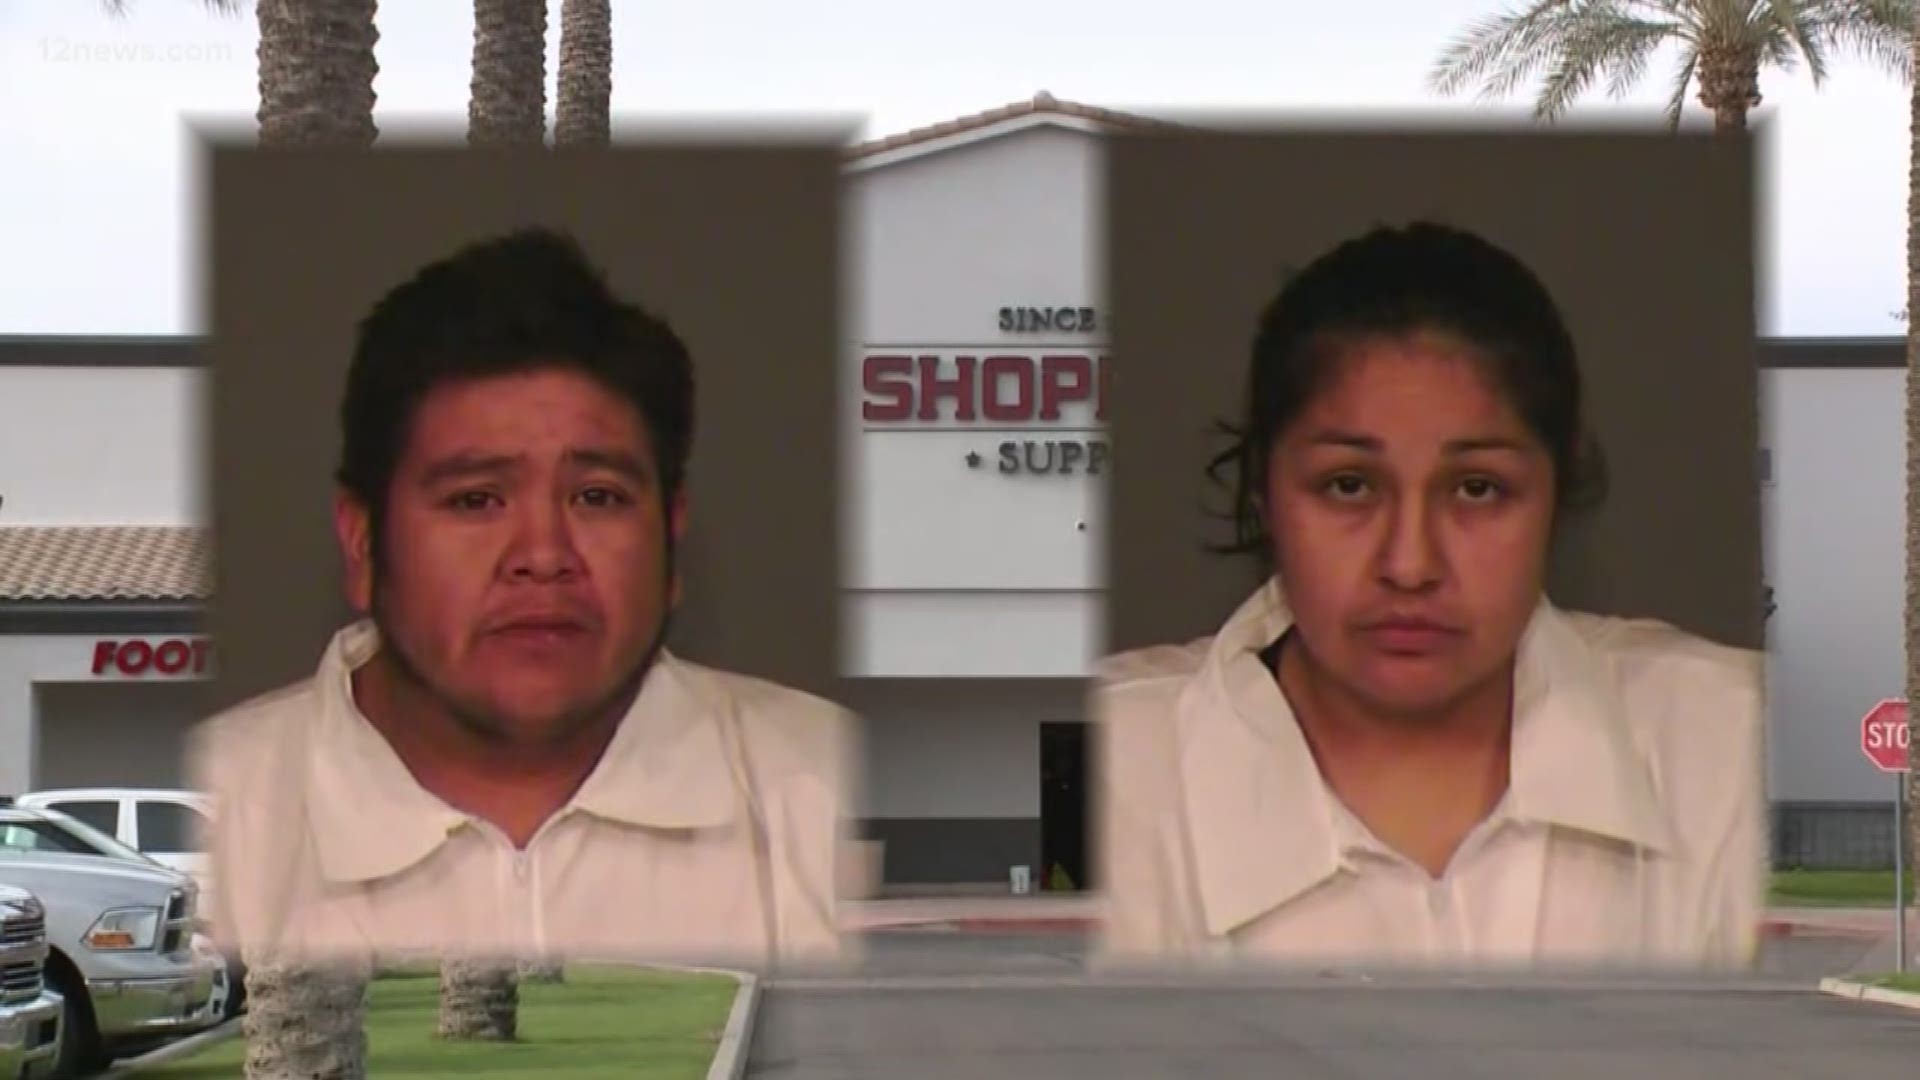 Two people have been arrested in connection to the theft of 21 guns from a Chandler store. The two suspects are believed to have been high on meth when they drove a pickup truck through the front entrance of the store, before leaving on foot. Nine guns are still missing, the ATF is involved.